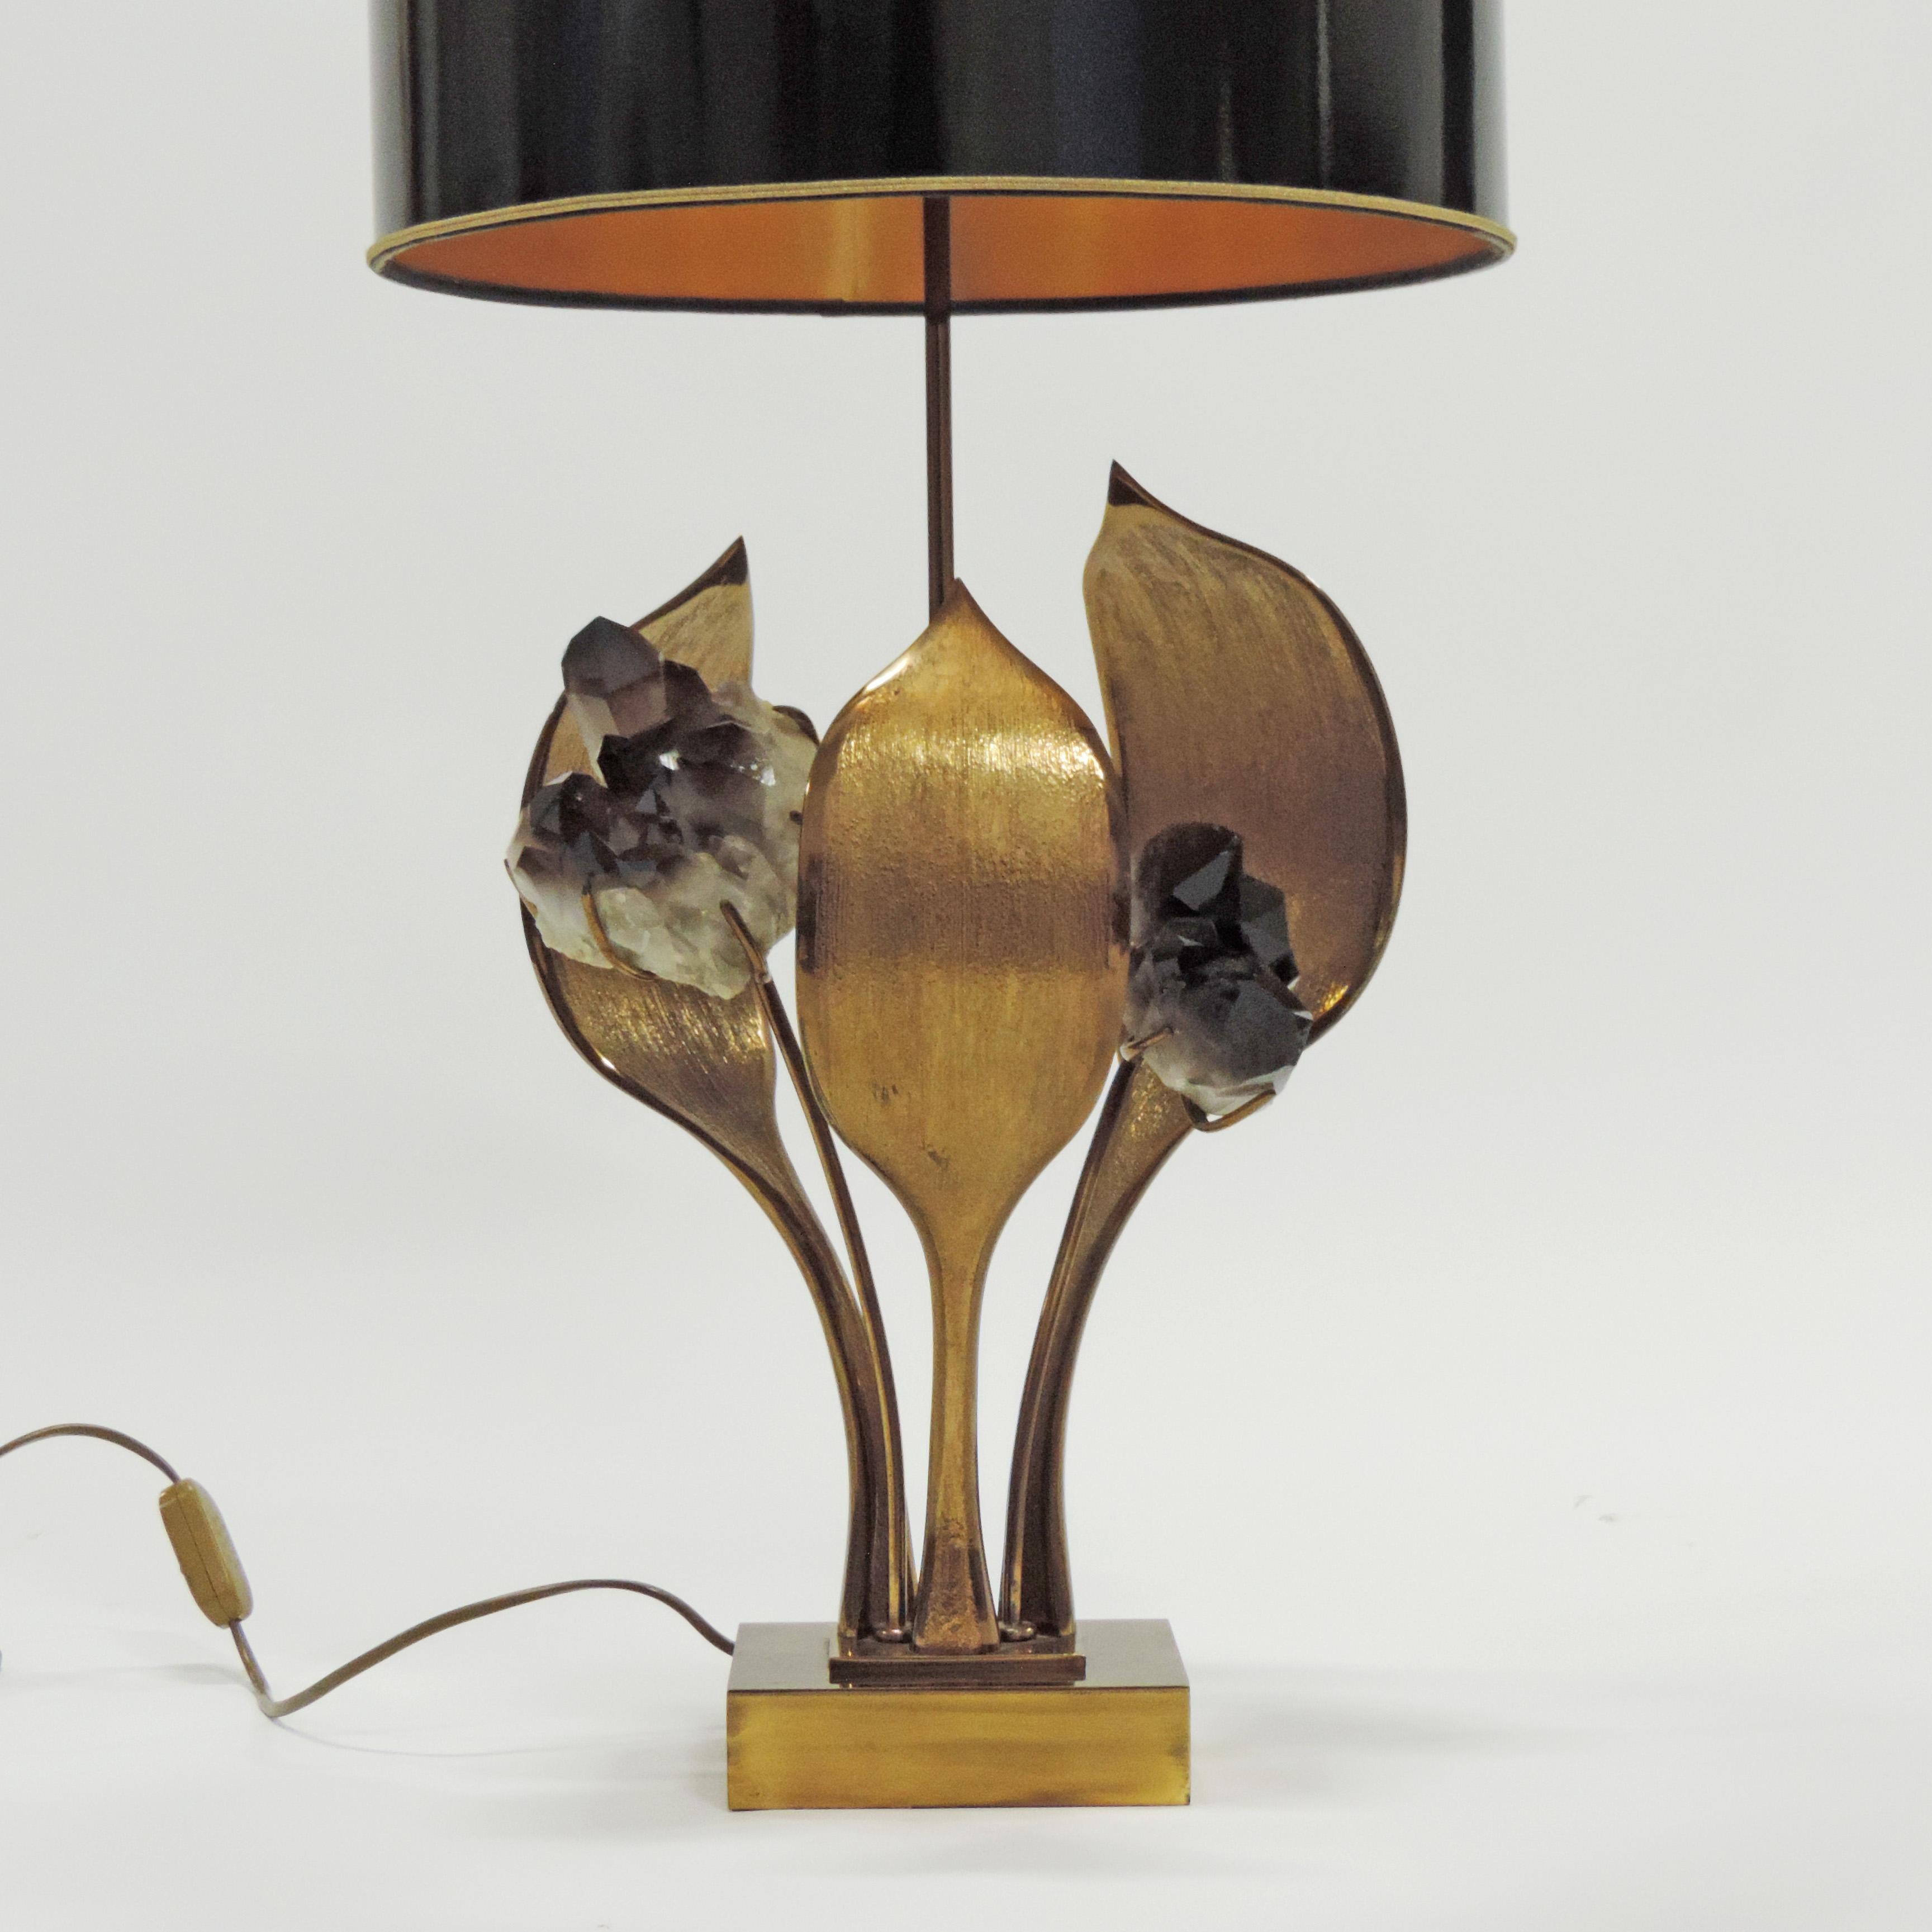 Belgian Willy Daro Rock Crystal and Bronze Flower Table Lamp, Belgium, 1970s For Sale